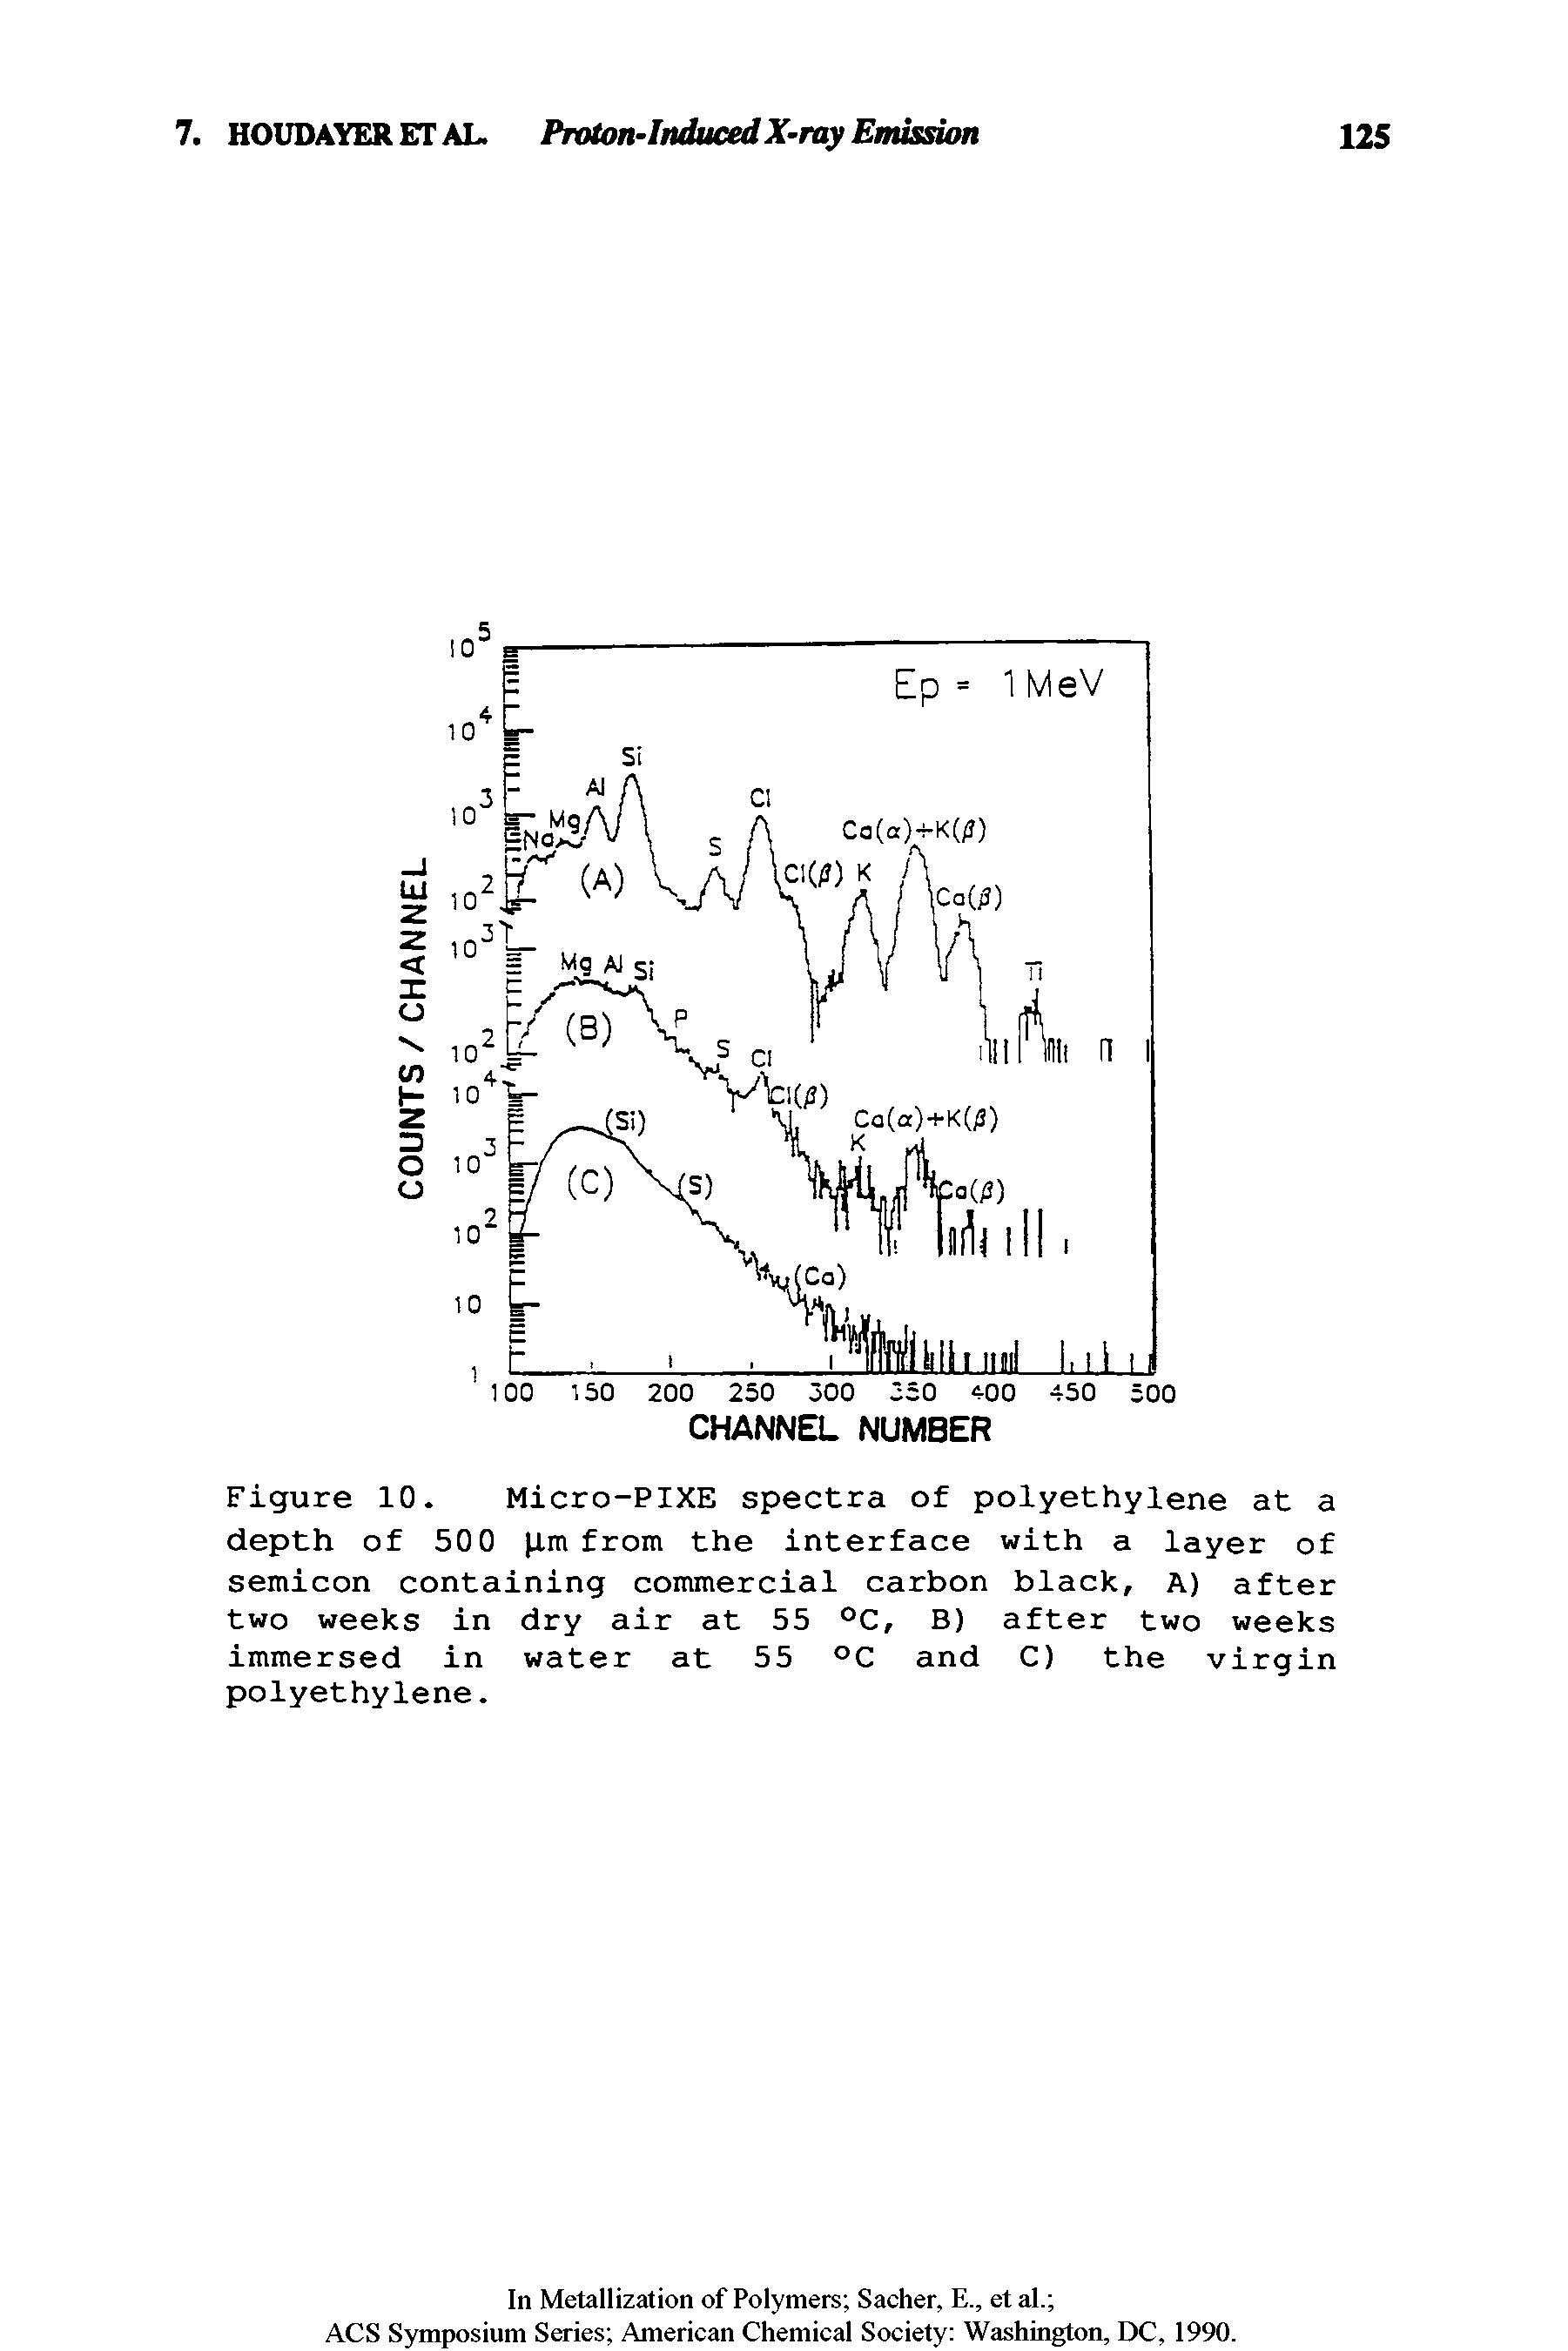 Figure 10. Micro-PIXE spectra of polyethylene at a depth of 50 0 lm from the interface with a layer of semicon containing commercial carbon black. A) after two weeks in dry air at 55 °C, B) after two weeks immersed in water at 55 °C and C) the virgin polyethylene.